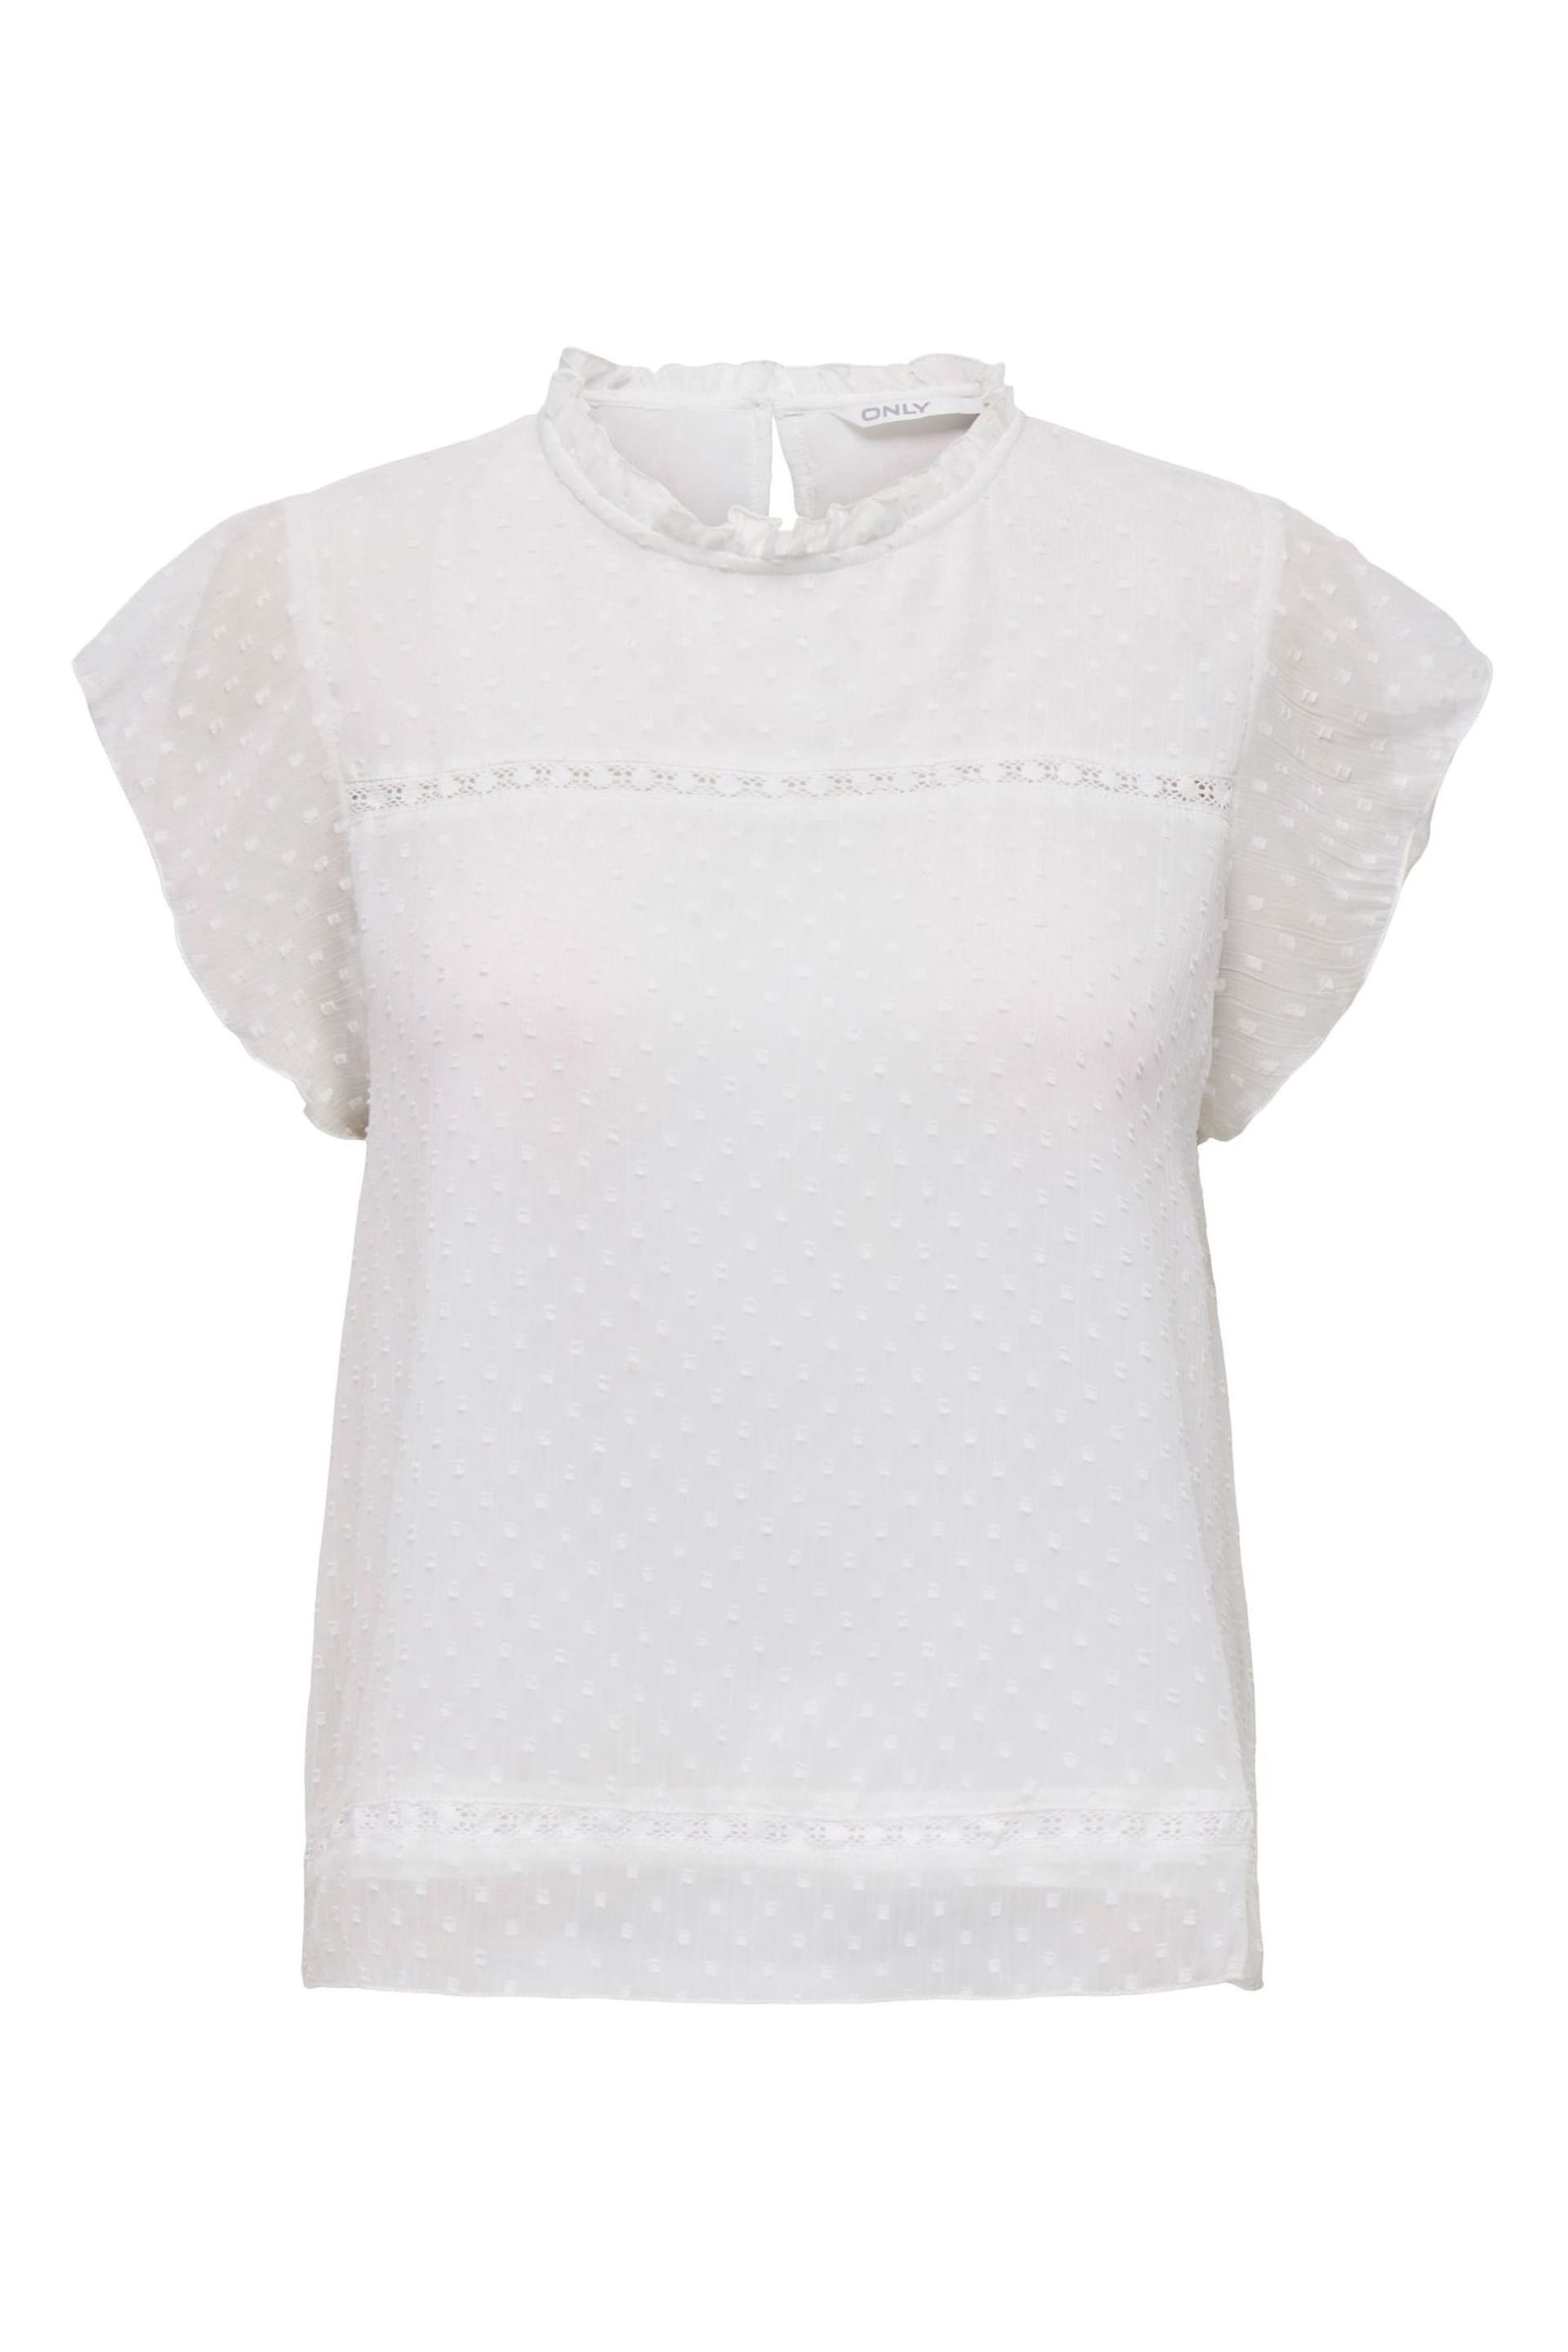 ONLY White Dobby Lace Detail Frill Top - Image 5 of 5